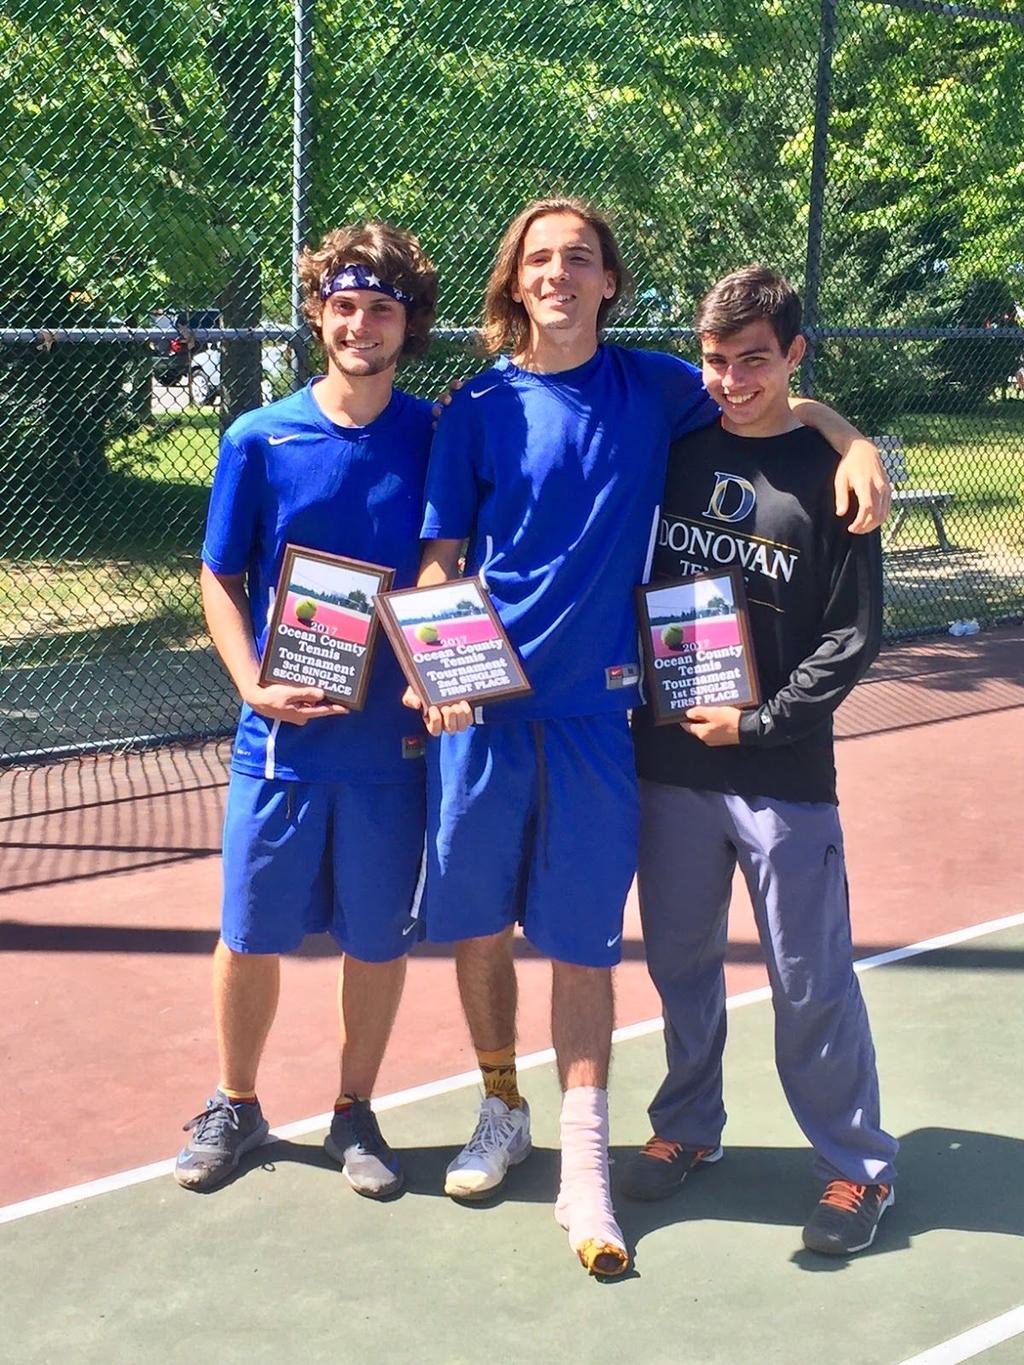 Congratulations to the Boys Tennis team who won The Ocean County Tennis Championship by one point over Toms River North. The boys had a fantastic Sunday after falling behind on Saturday.